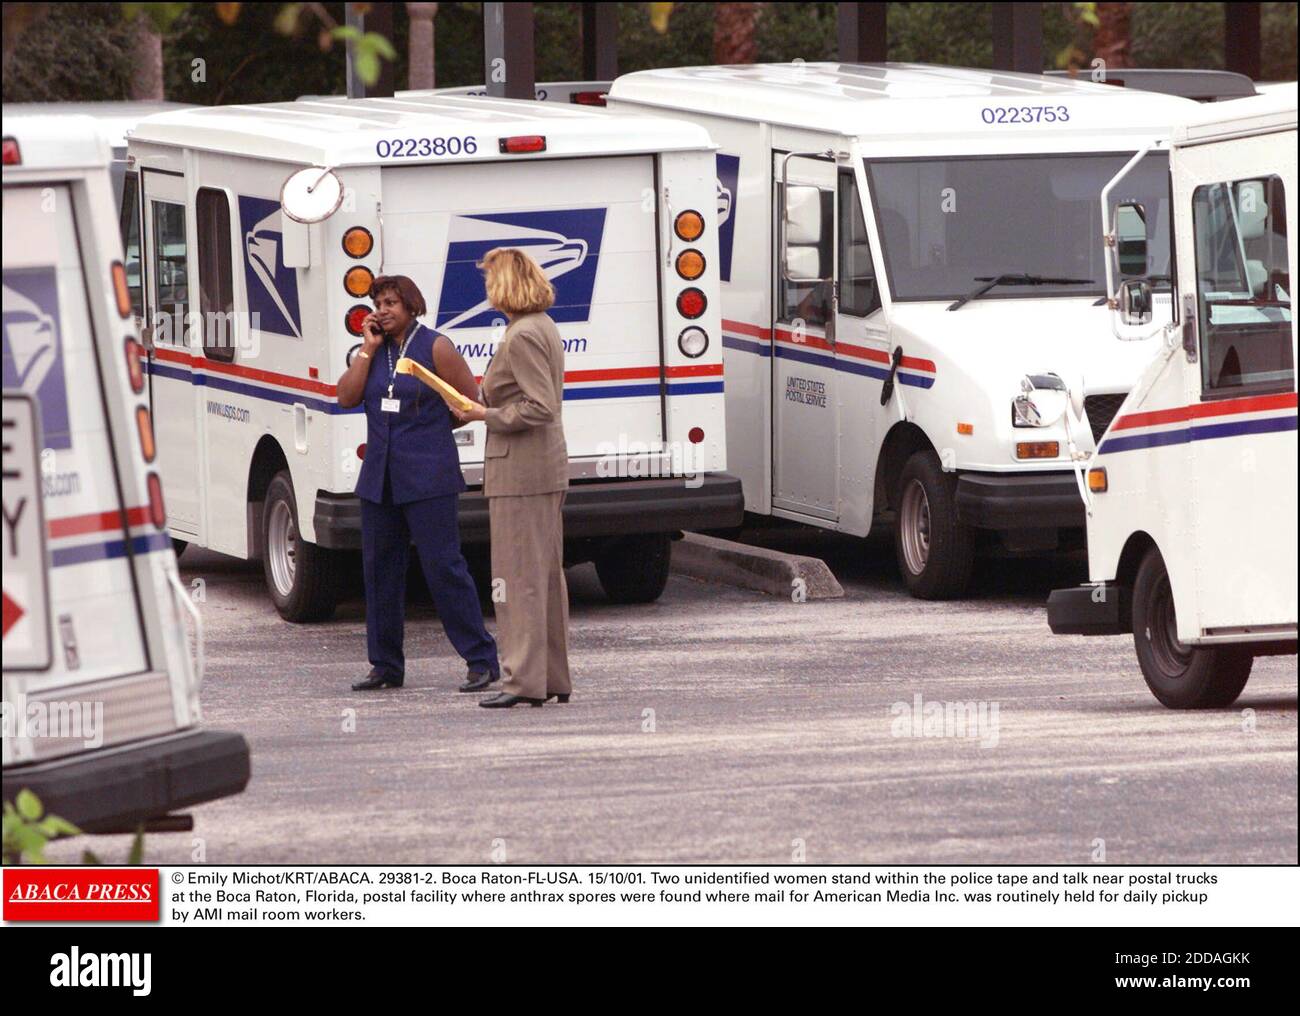 NO FILM, NO VIDEO, NO TV, NO DOCUMENTARY - © Emily Michot/KRT/ABACA. 29381-2. Boca Raton-FL-USA. 15/10/01. Two unidentified women stand within the police tape and talk near postal trucks at the Boca Raton, Florida, postal facility where anthrax spores were found where mail for American Media Inc. Stock Photo